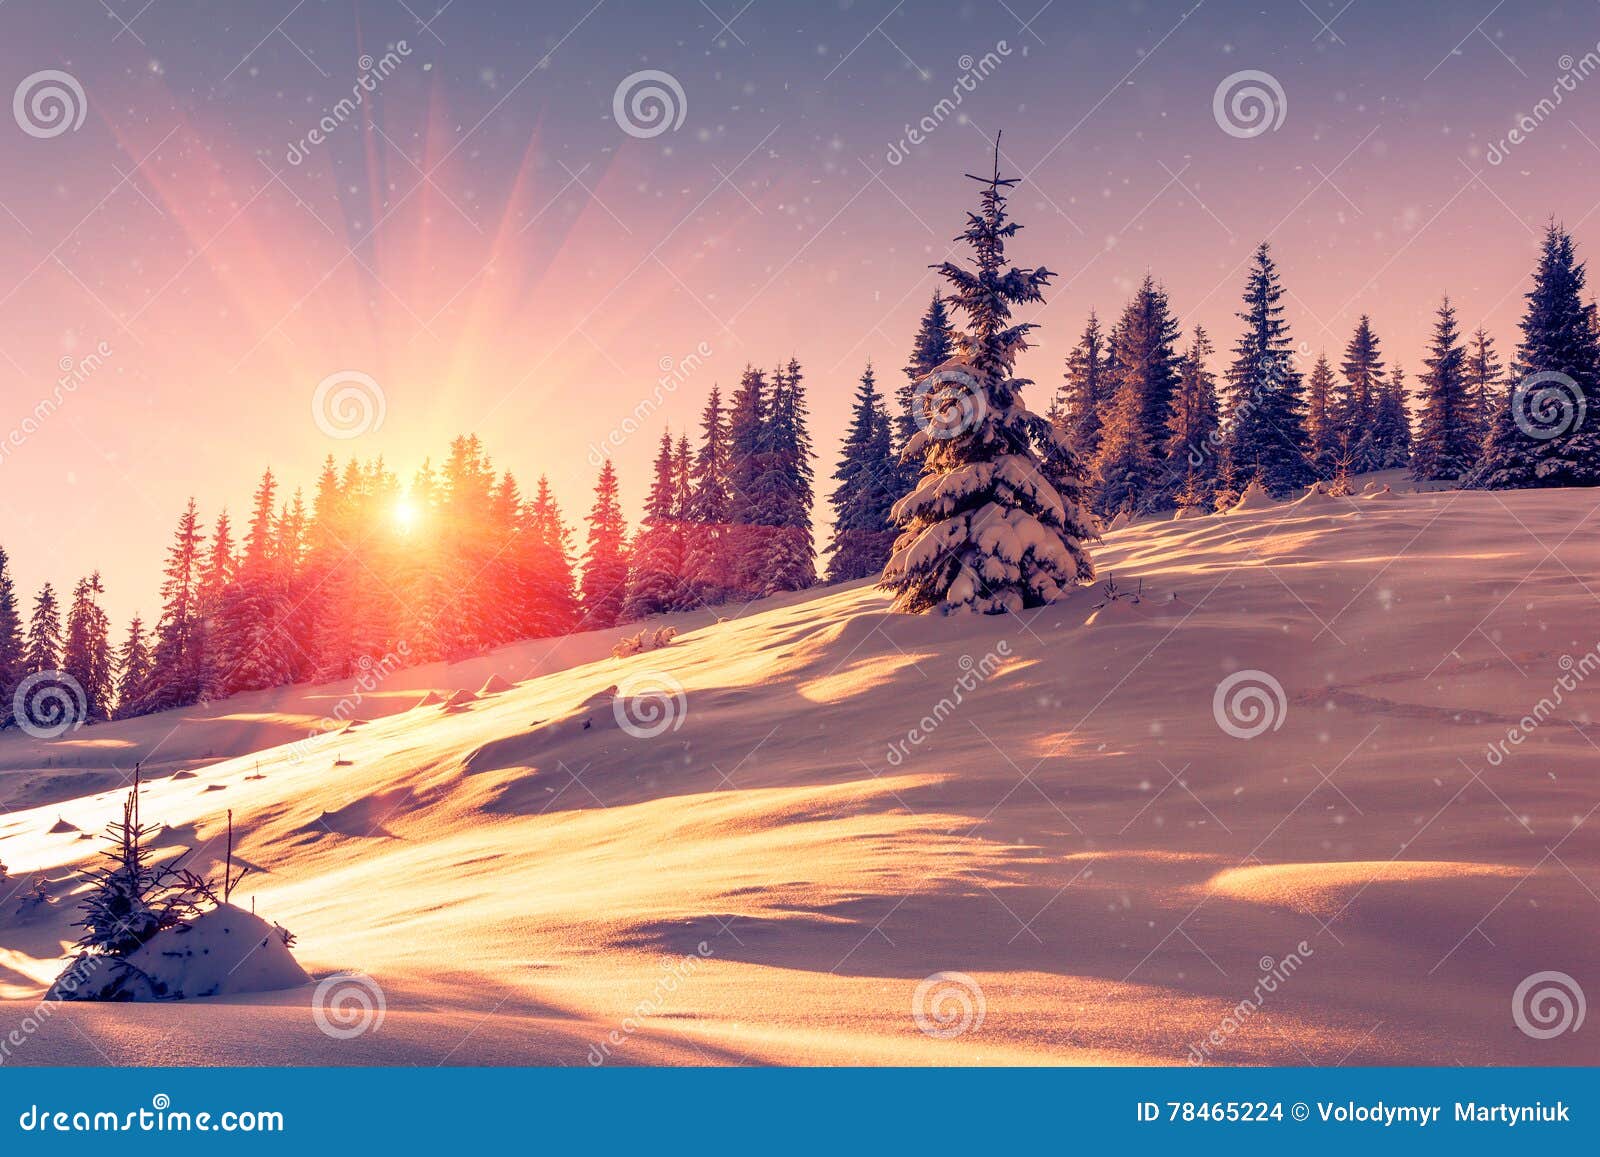 beautiful winter landscape in mountains. view of snow-covered conifer trees and snowflakes at sunrise. merry christmas and happy